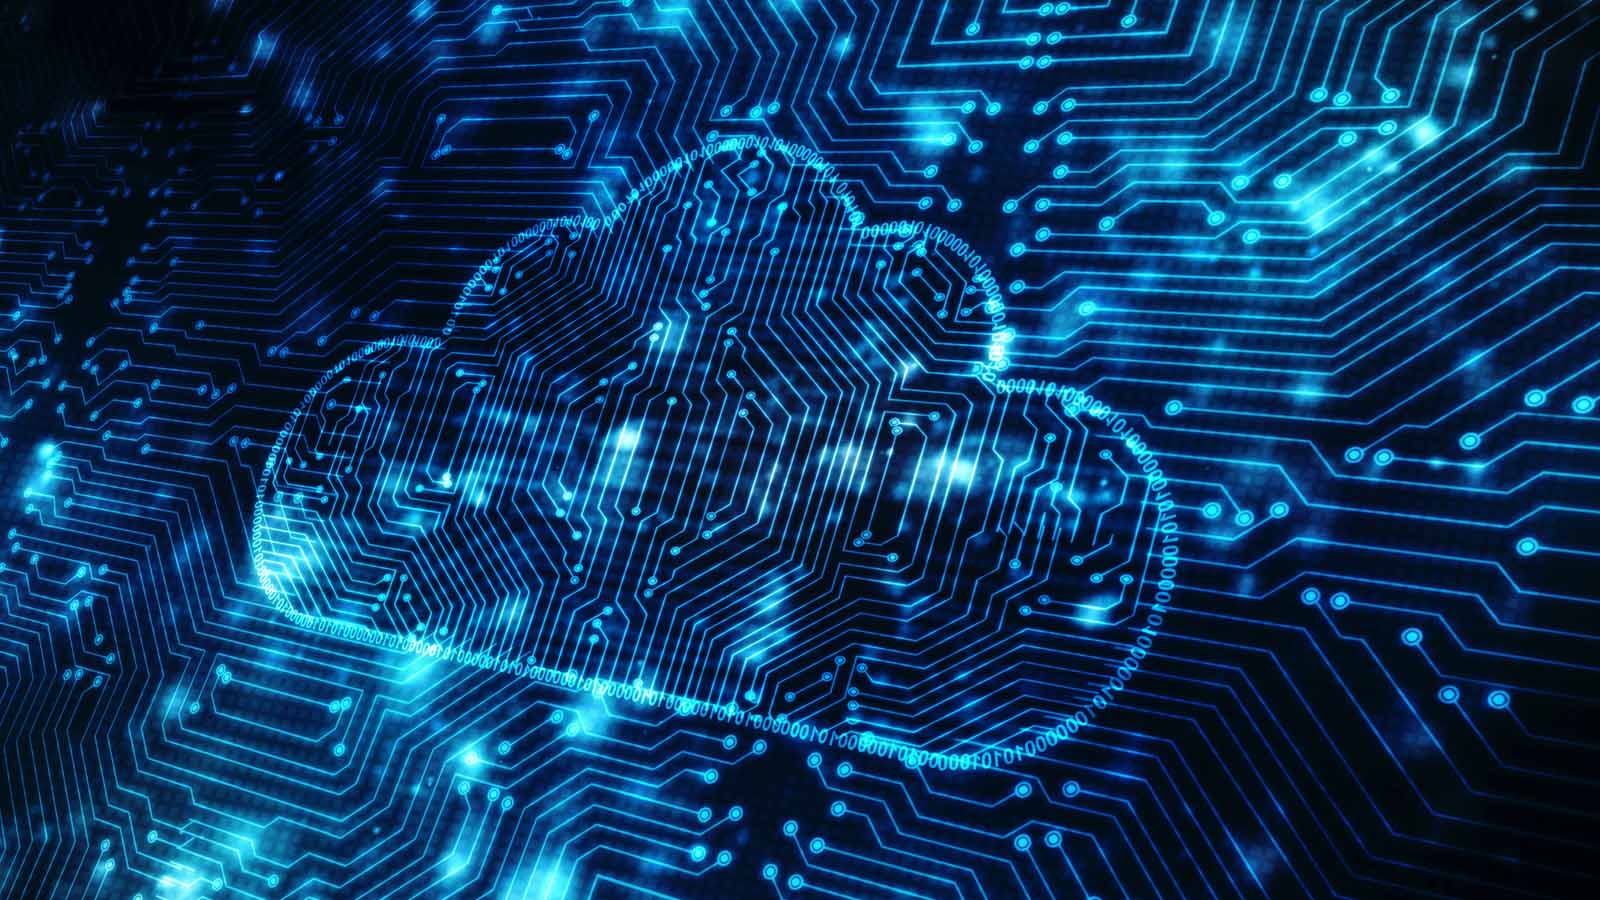 The Top 3 Growth Stocks in Cloud Computing